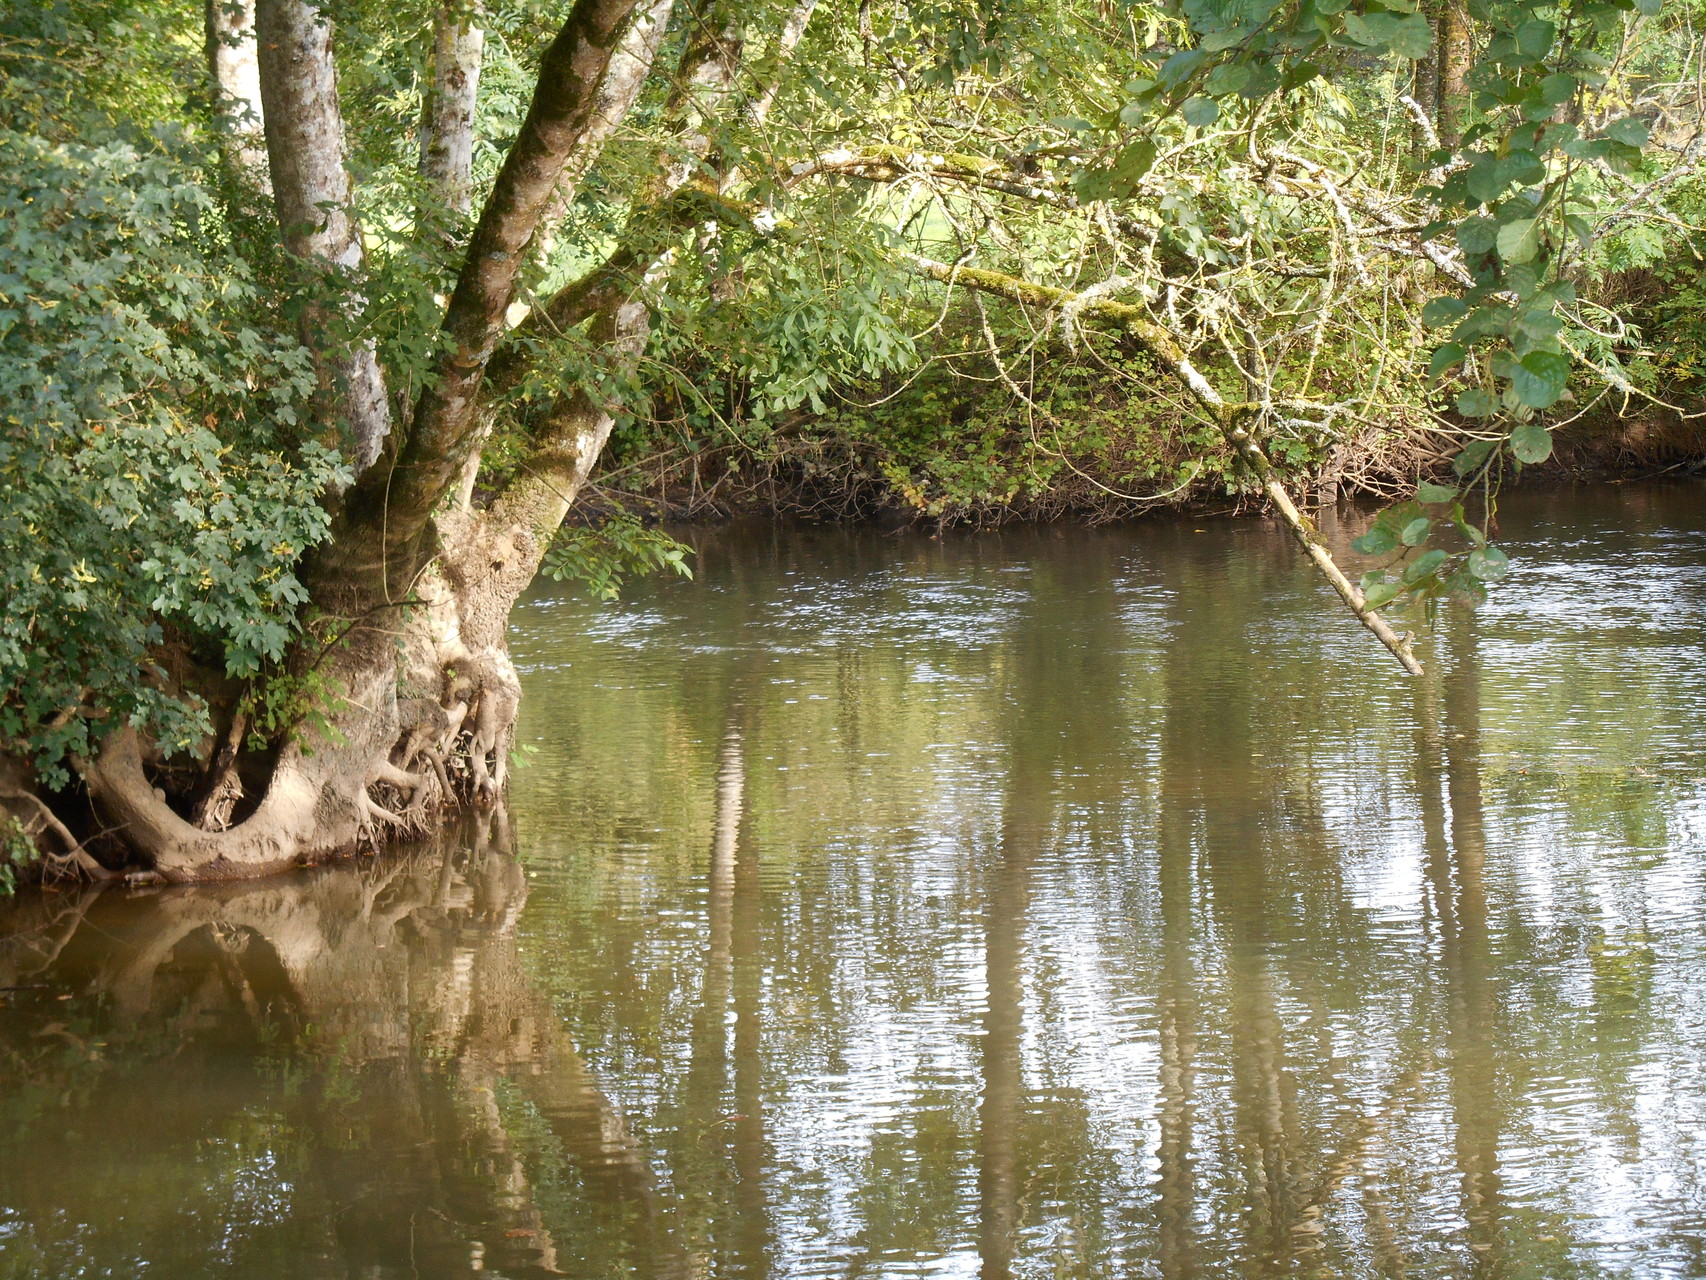 The quite and wild "Rouvre" river